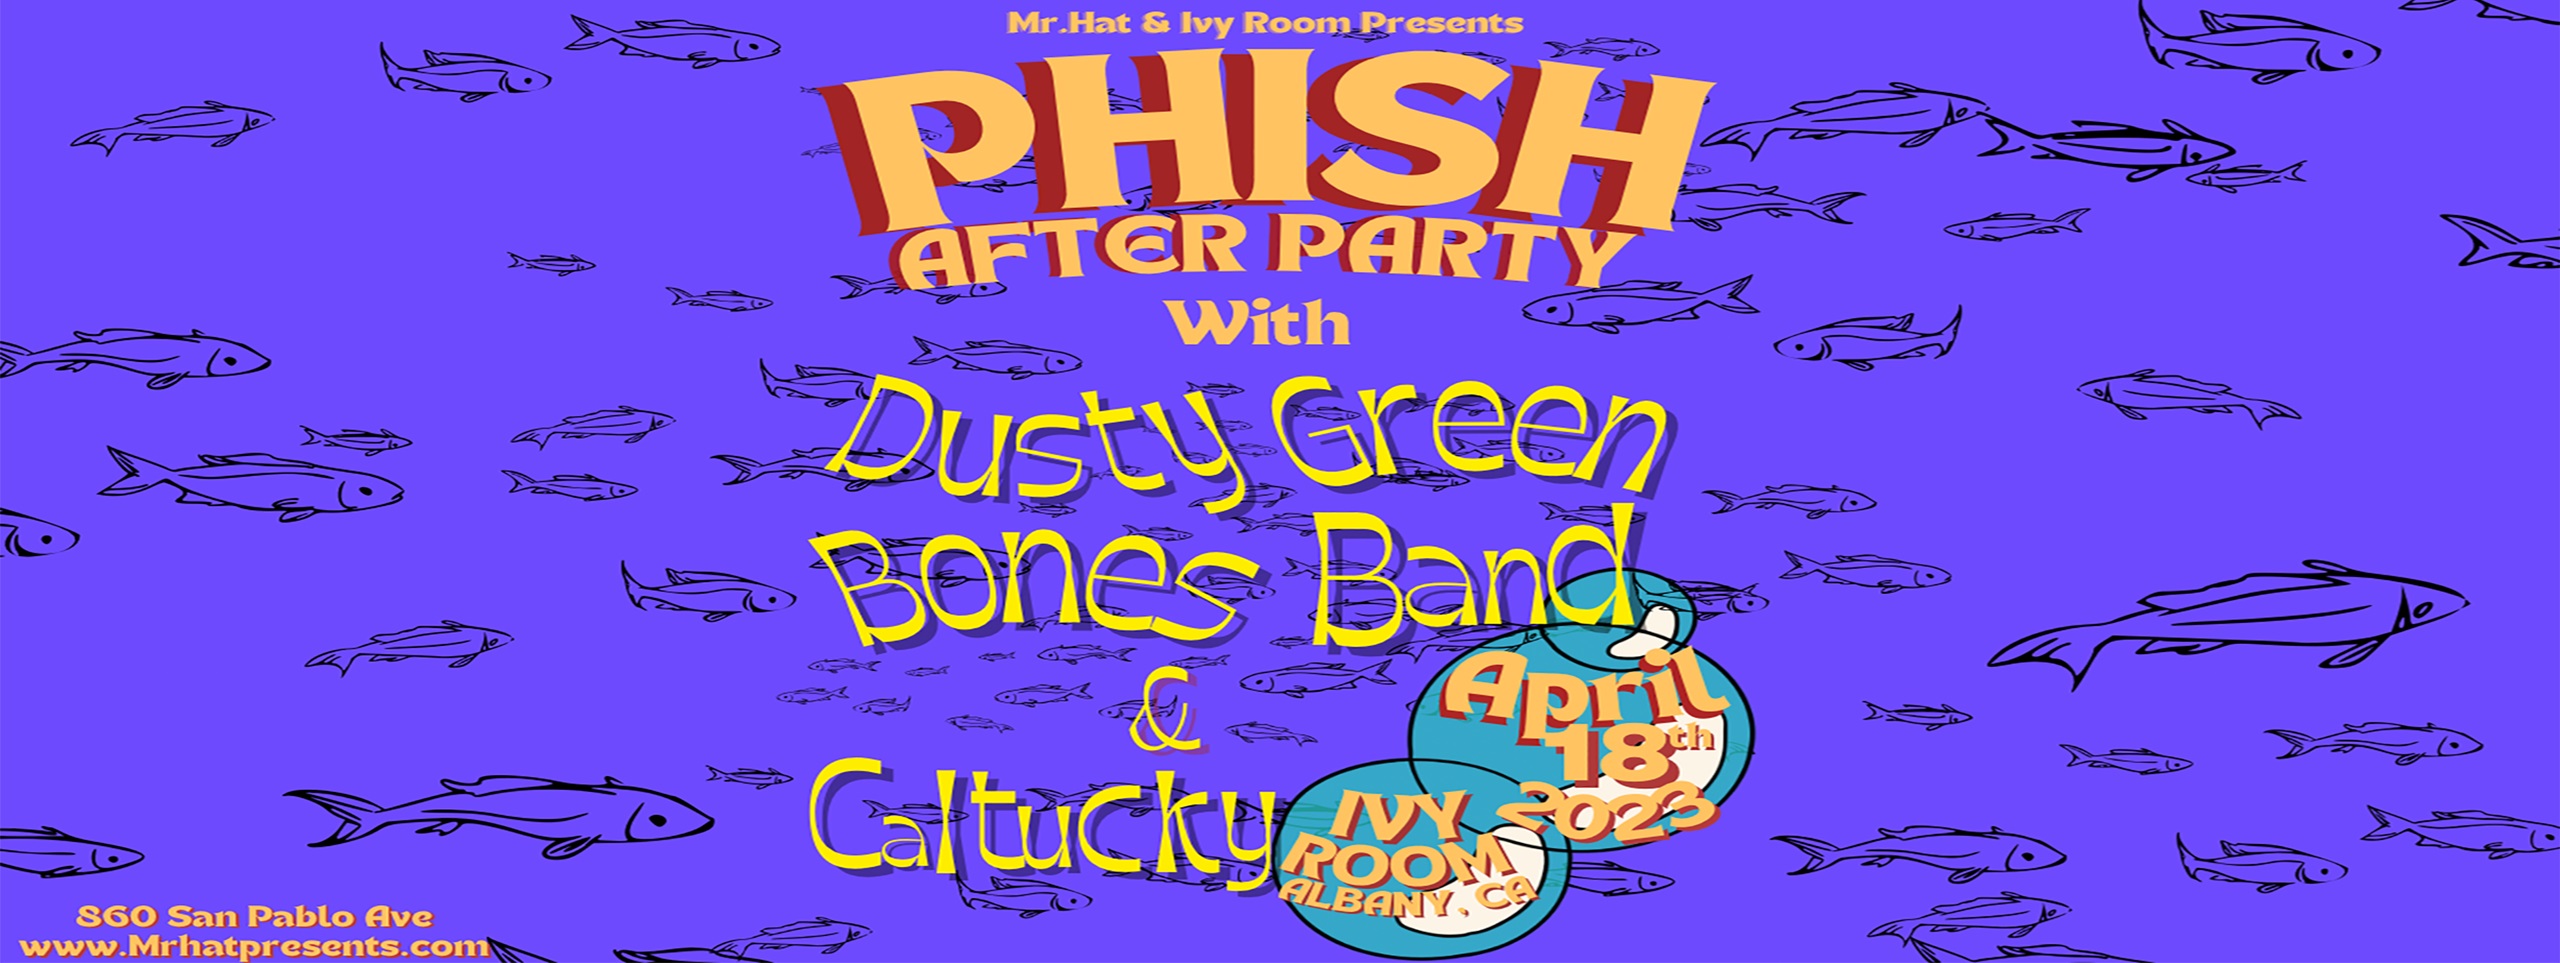 PHISH AFTERPARTIES at Ivy Room | April 17-19th, 2023